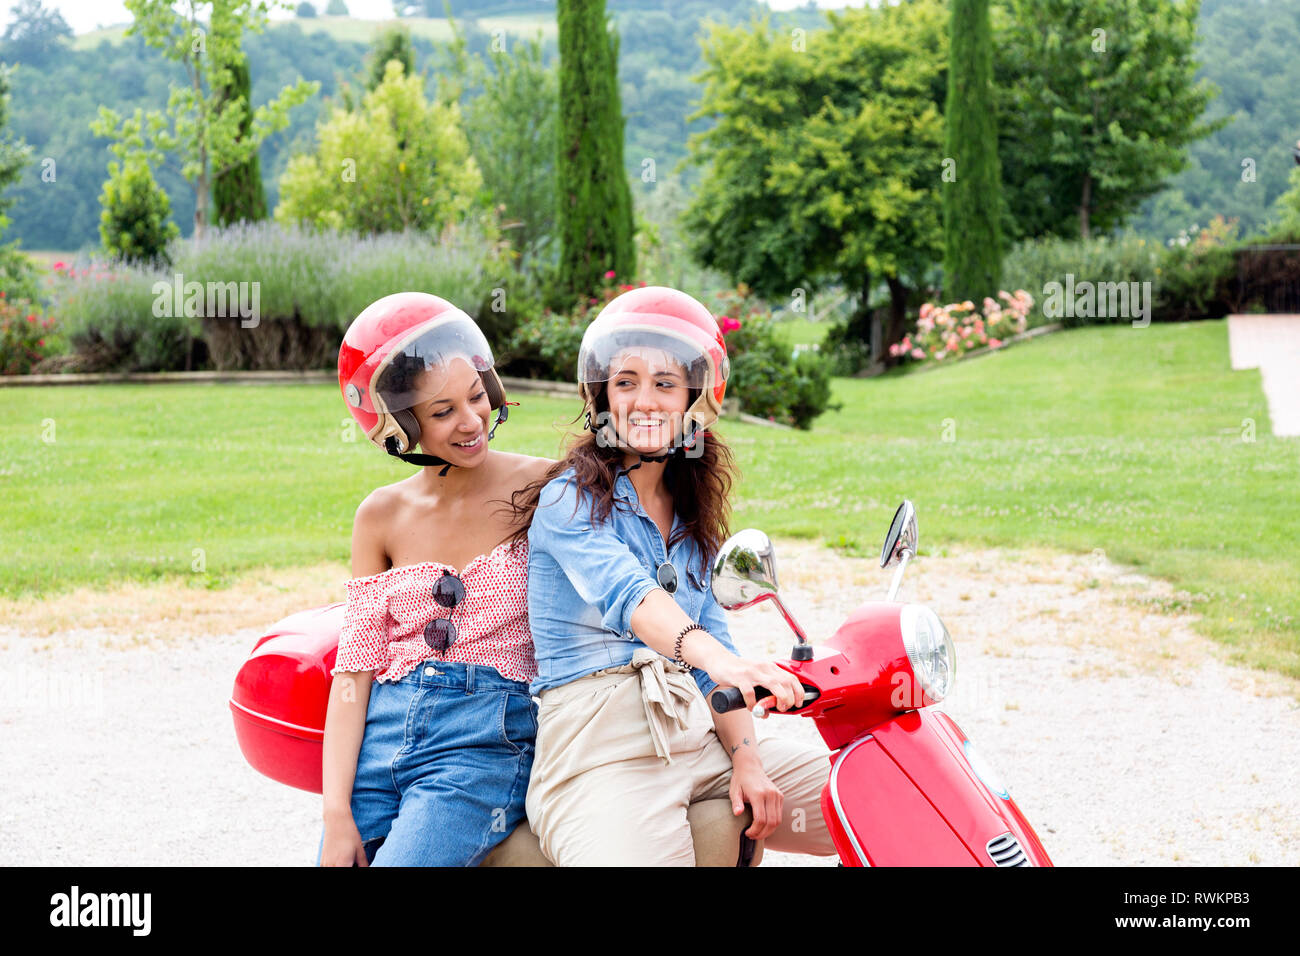 Women on scooter in countryside, Città della Pieve, Umbria, Italy Stock Photo